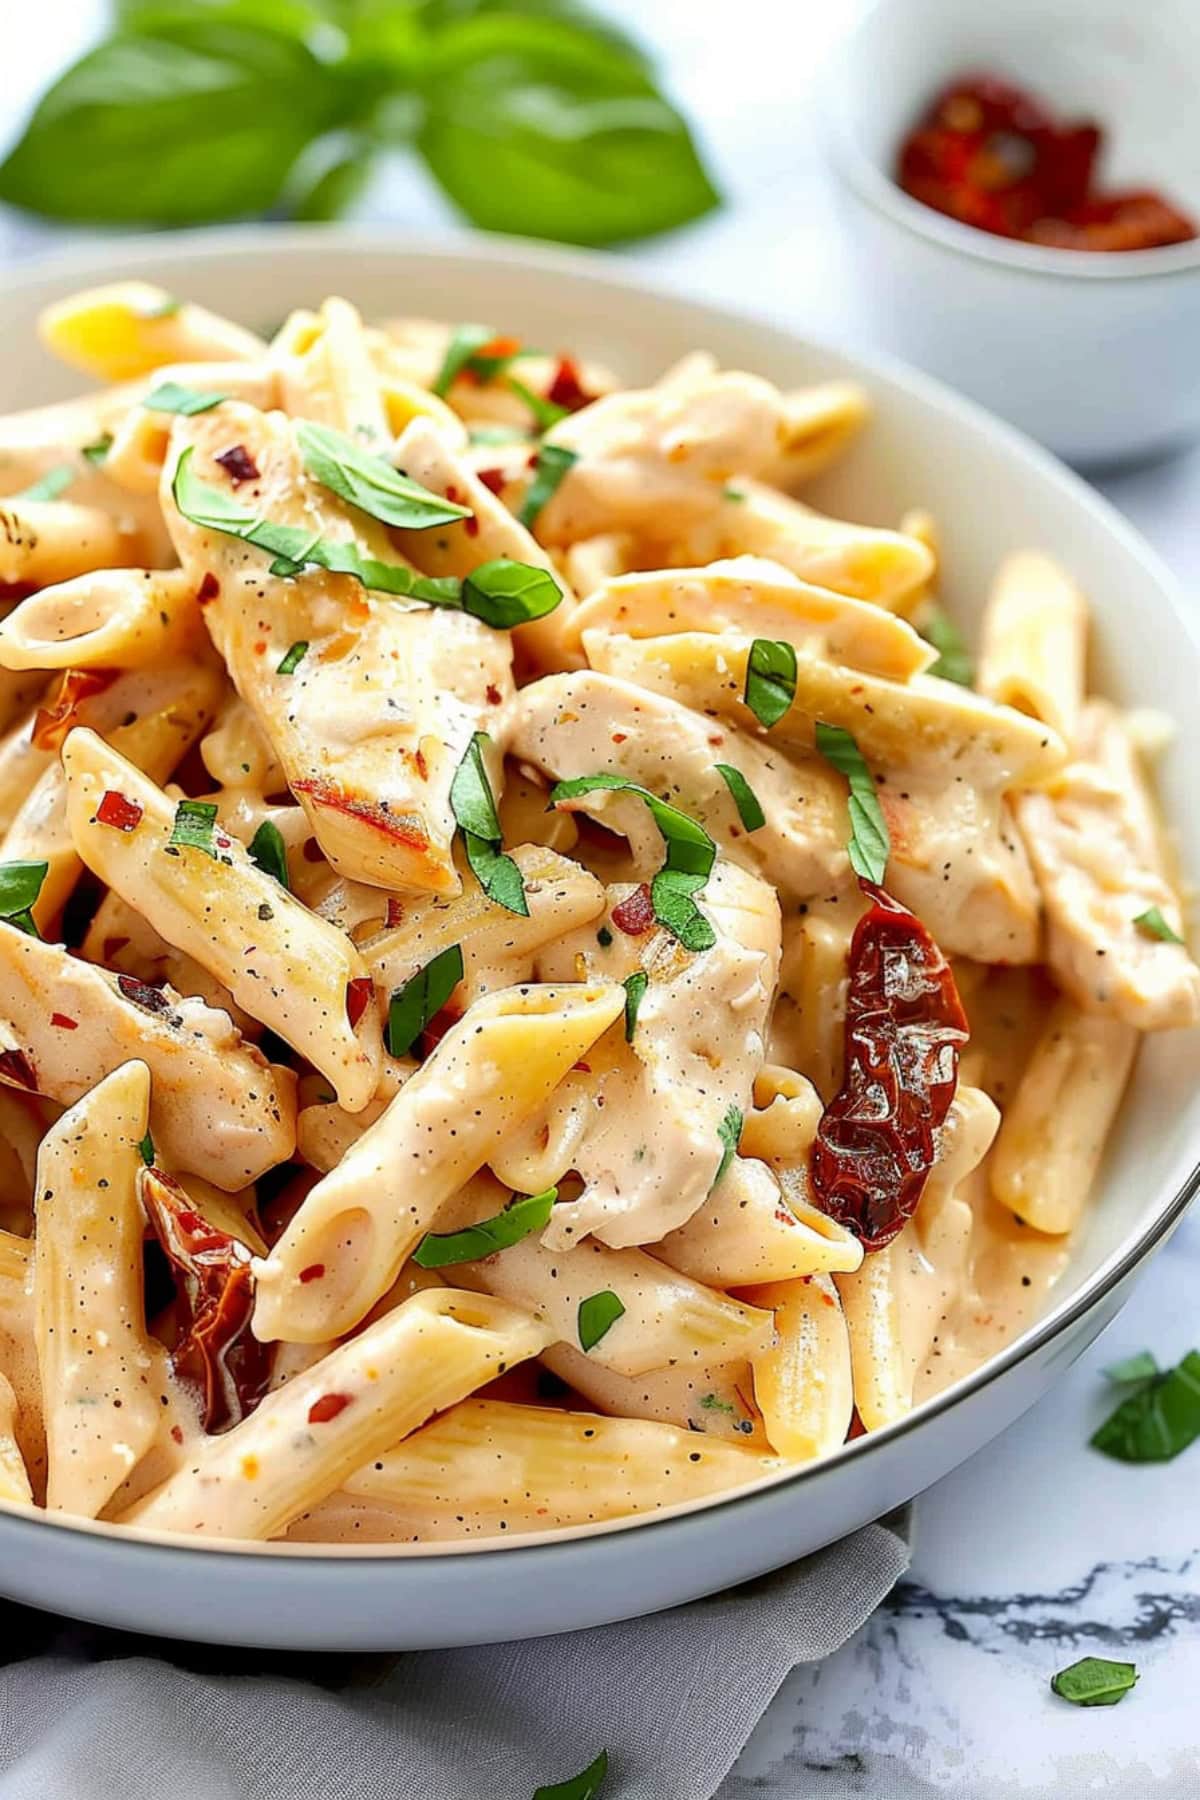 Serving of penne pasta with creamy sauce, chicken and sun dried tomatoes.